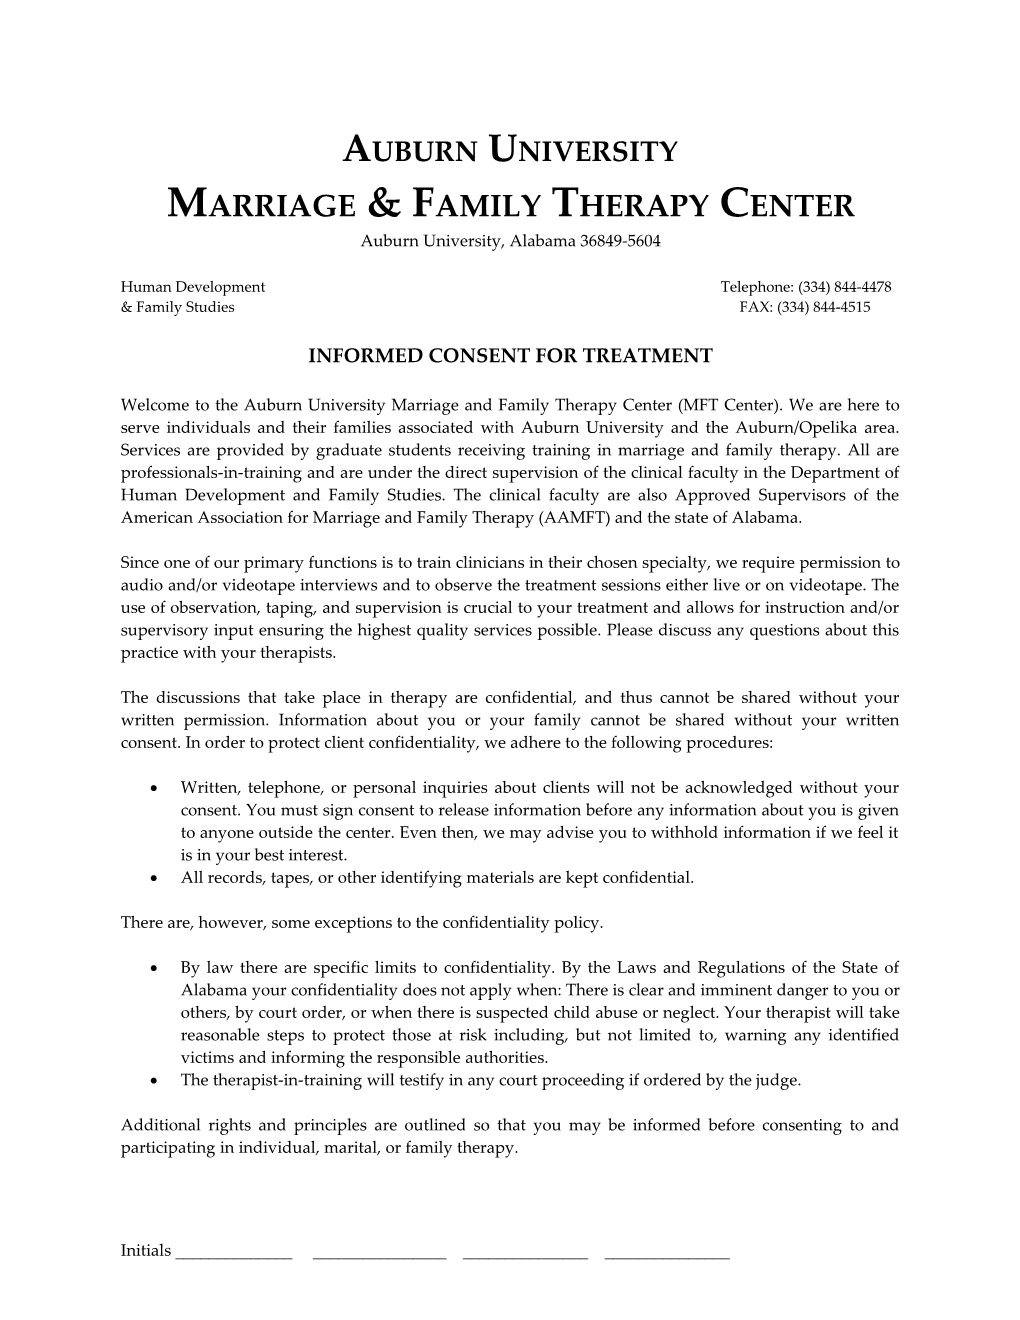 Marriage & Family Therapy Center